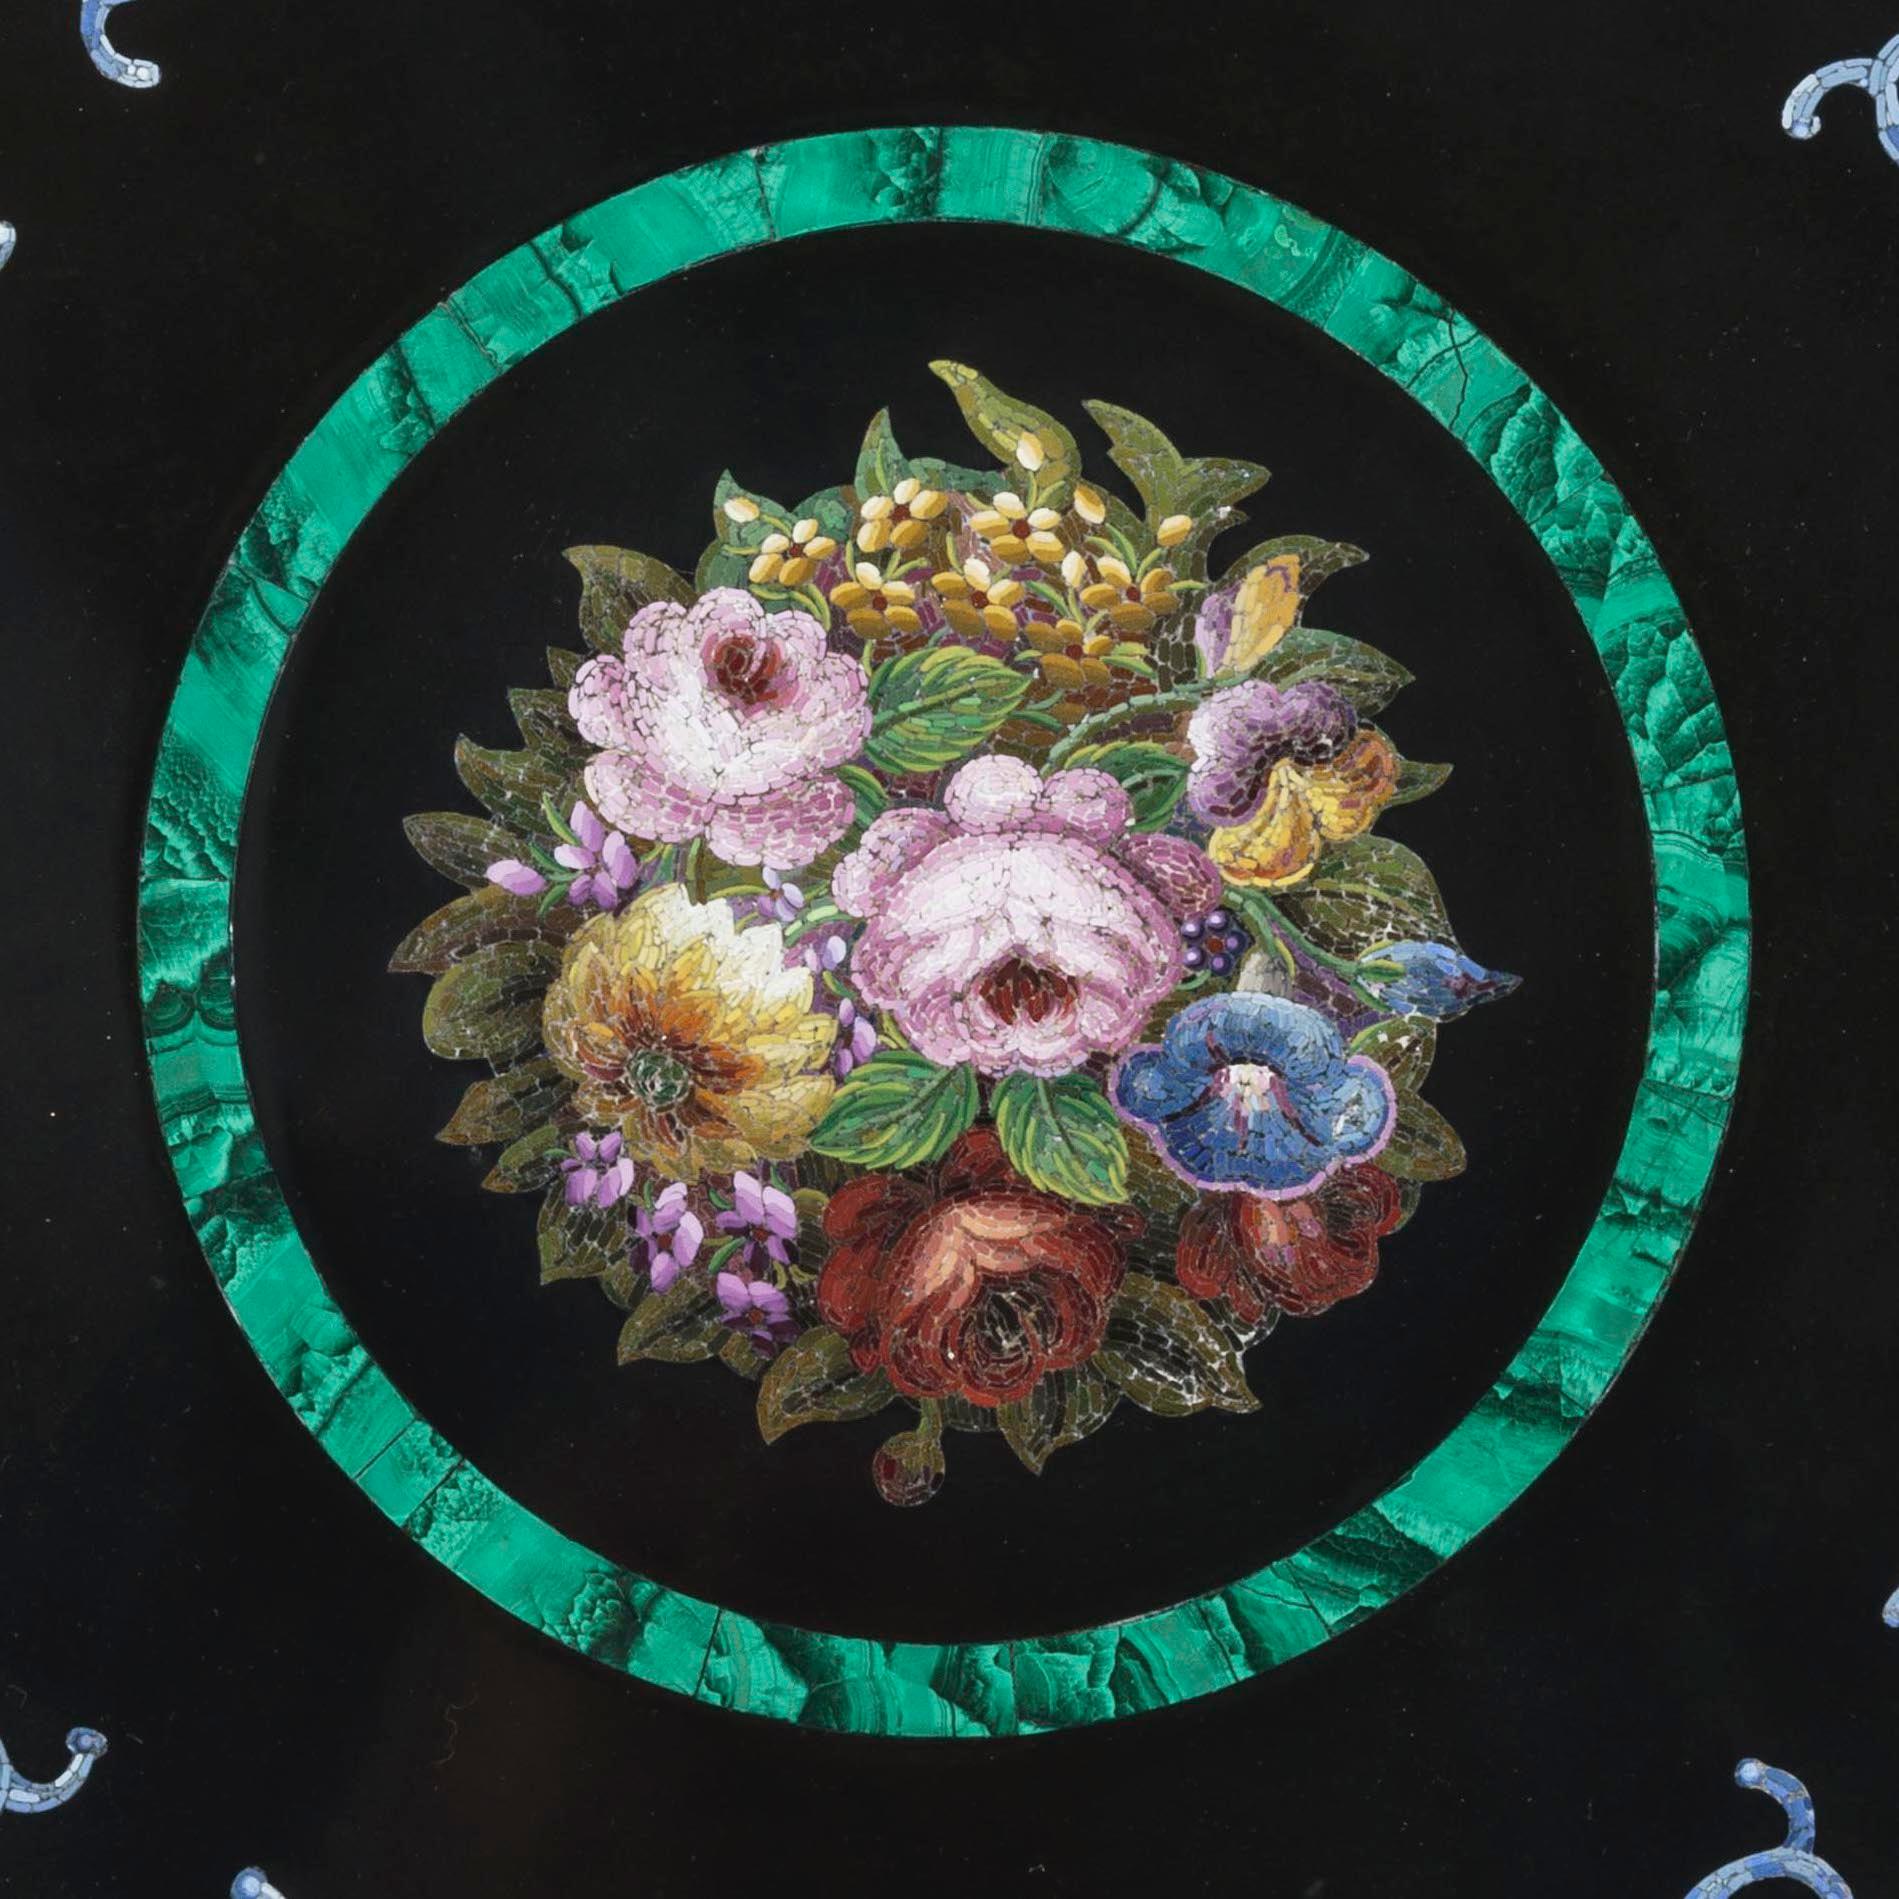 A grand tour circular table top
Possibly by Domenico Moglia

The circular platform of marmore nero, inset with fine micromosaic panels consisting of hundreds of coloured glass tesserae; a central flower bouquet sit within a malachite border